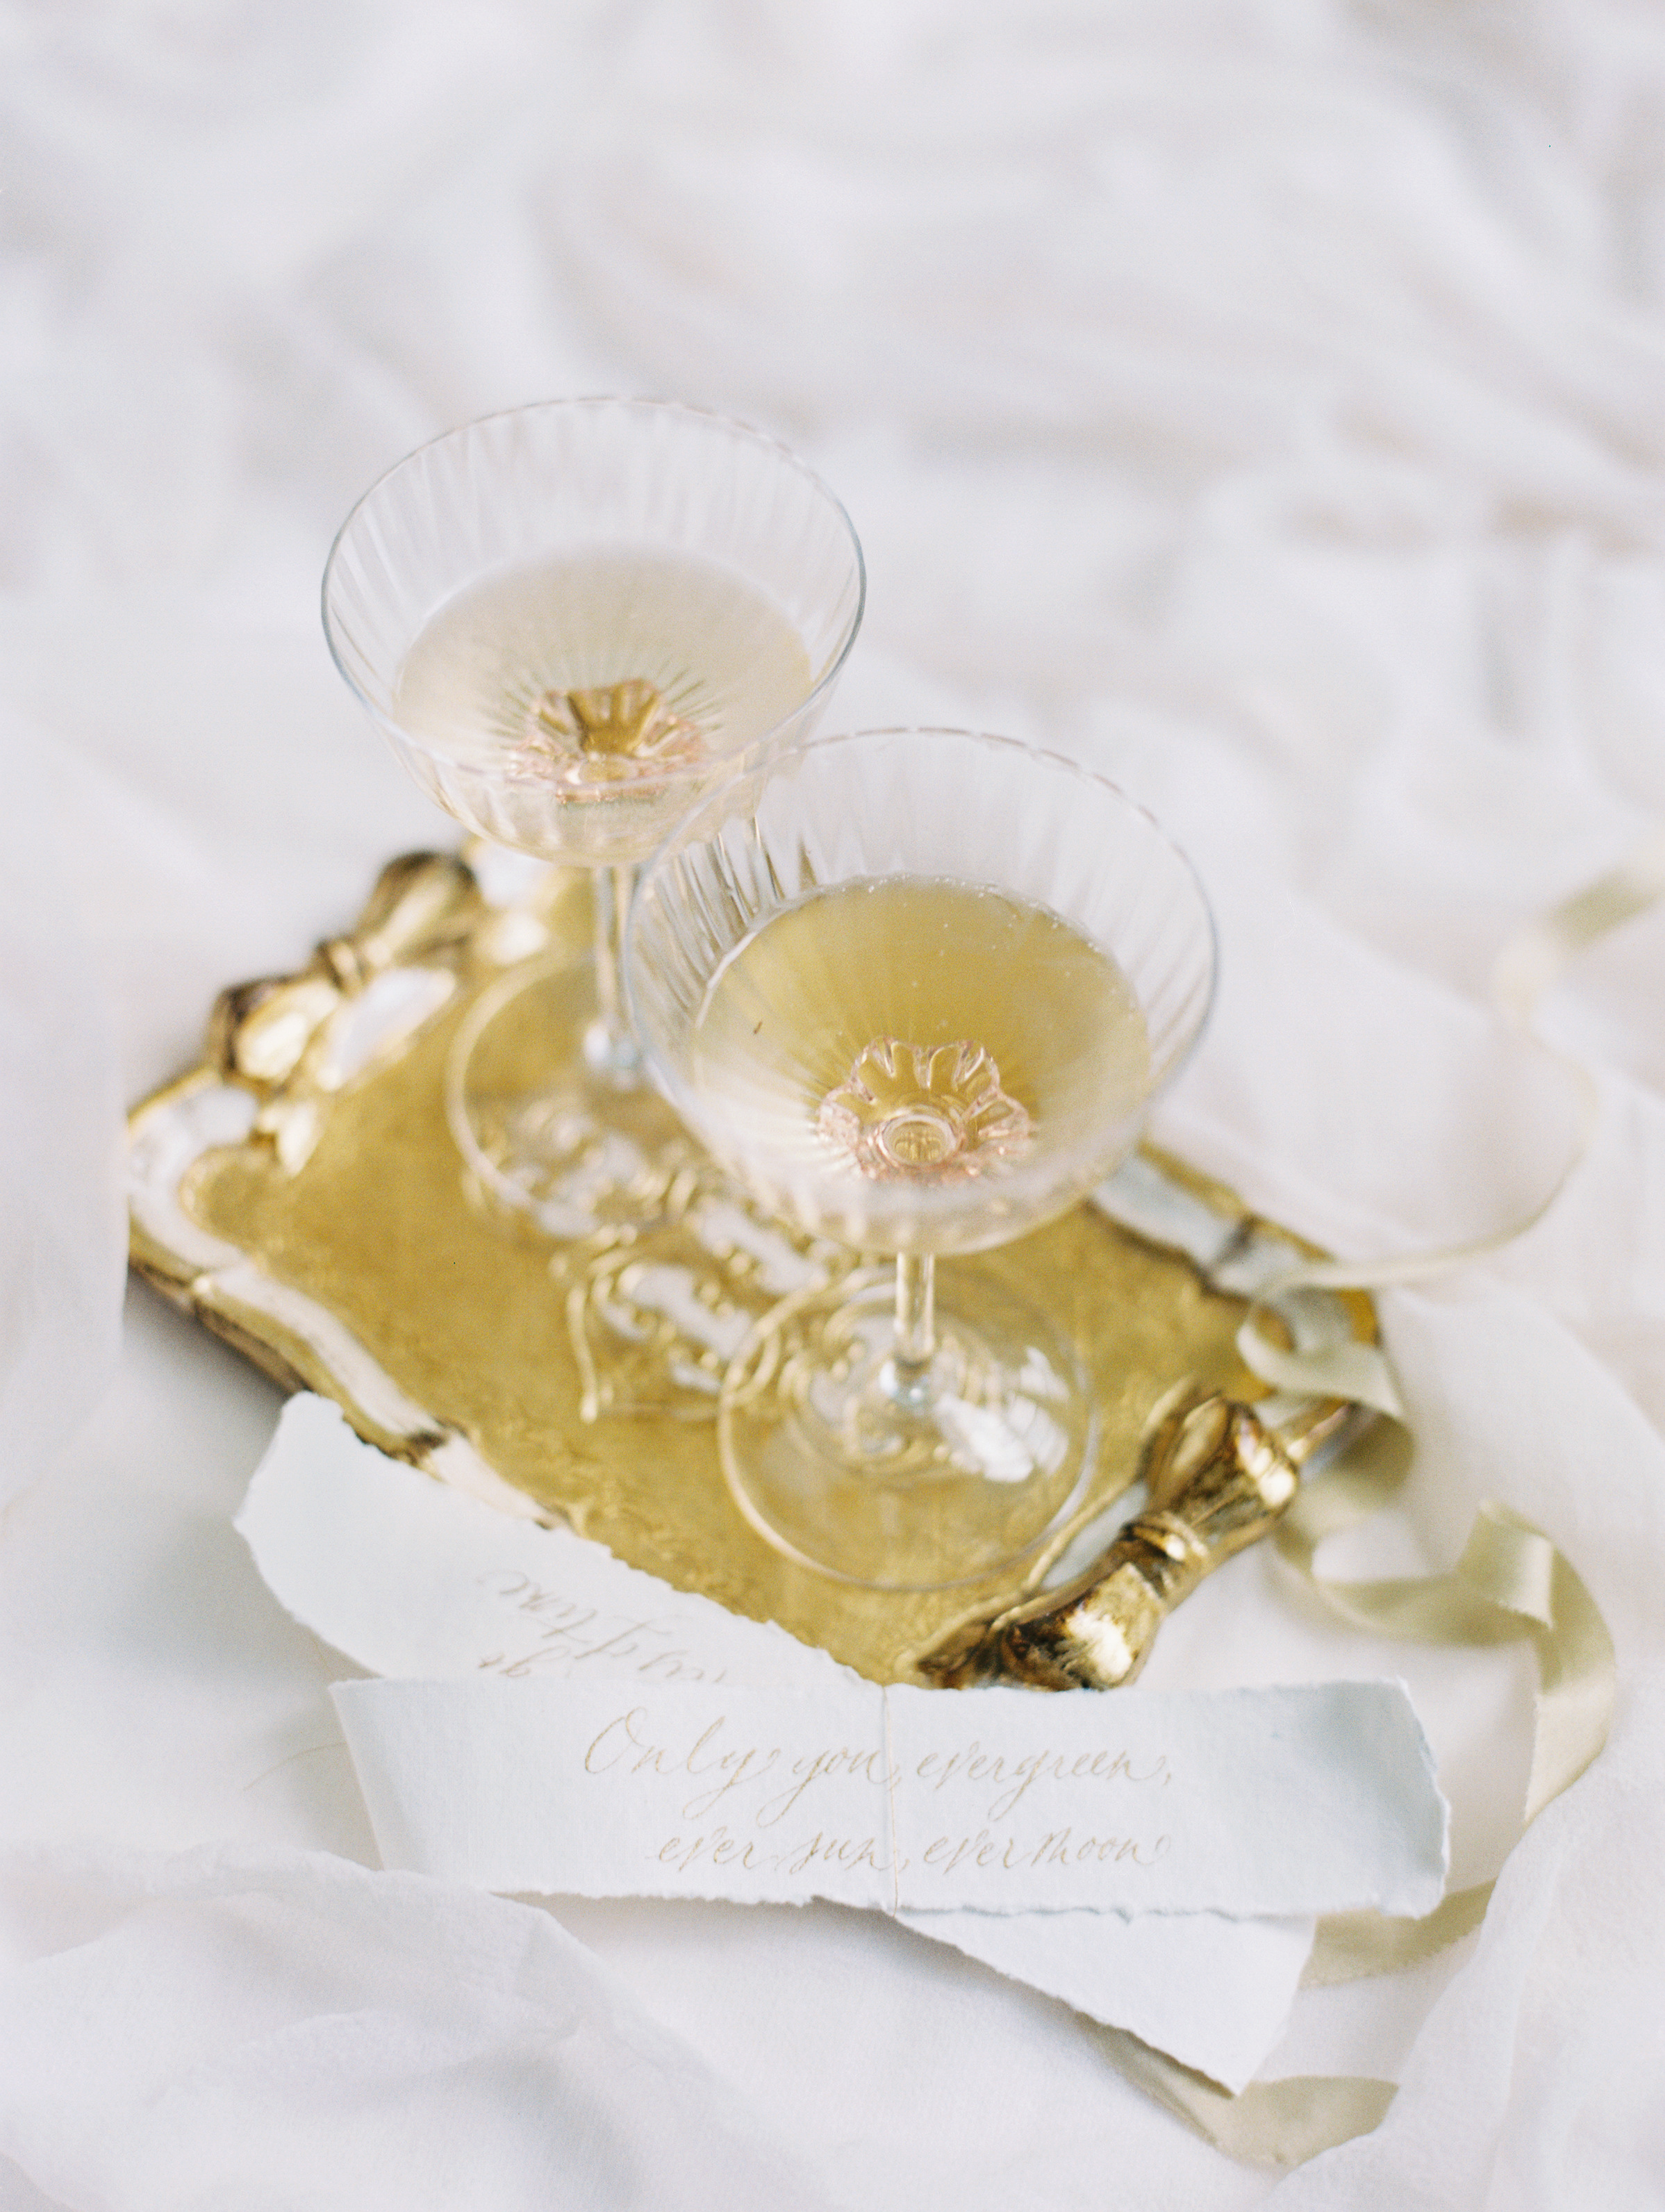 Photography: Lisa Ziesing with Abby Jiu Photography | Planning & Styling: Lauryn Prattes Styling and Events | Handmade Paper & Calligraphy: Spurlé Gul Studio